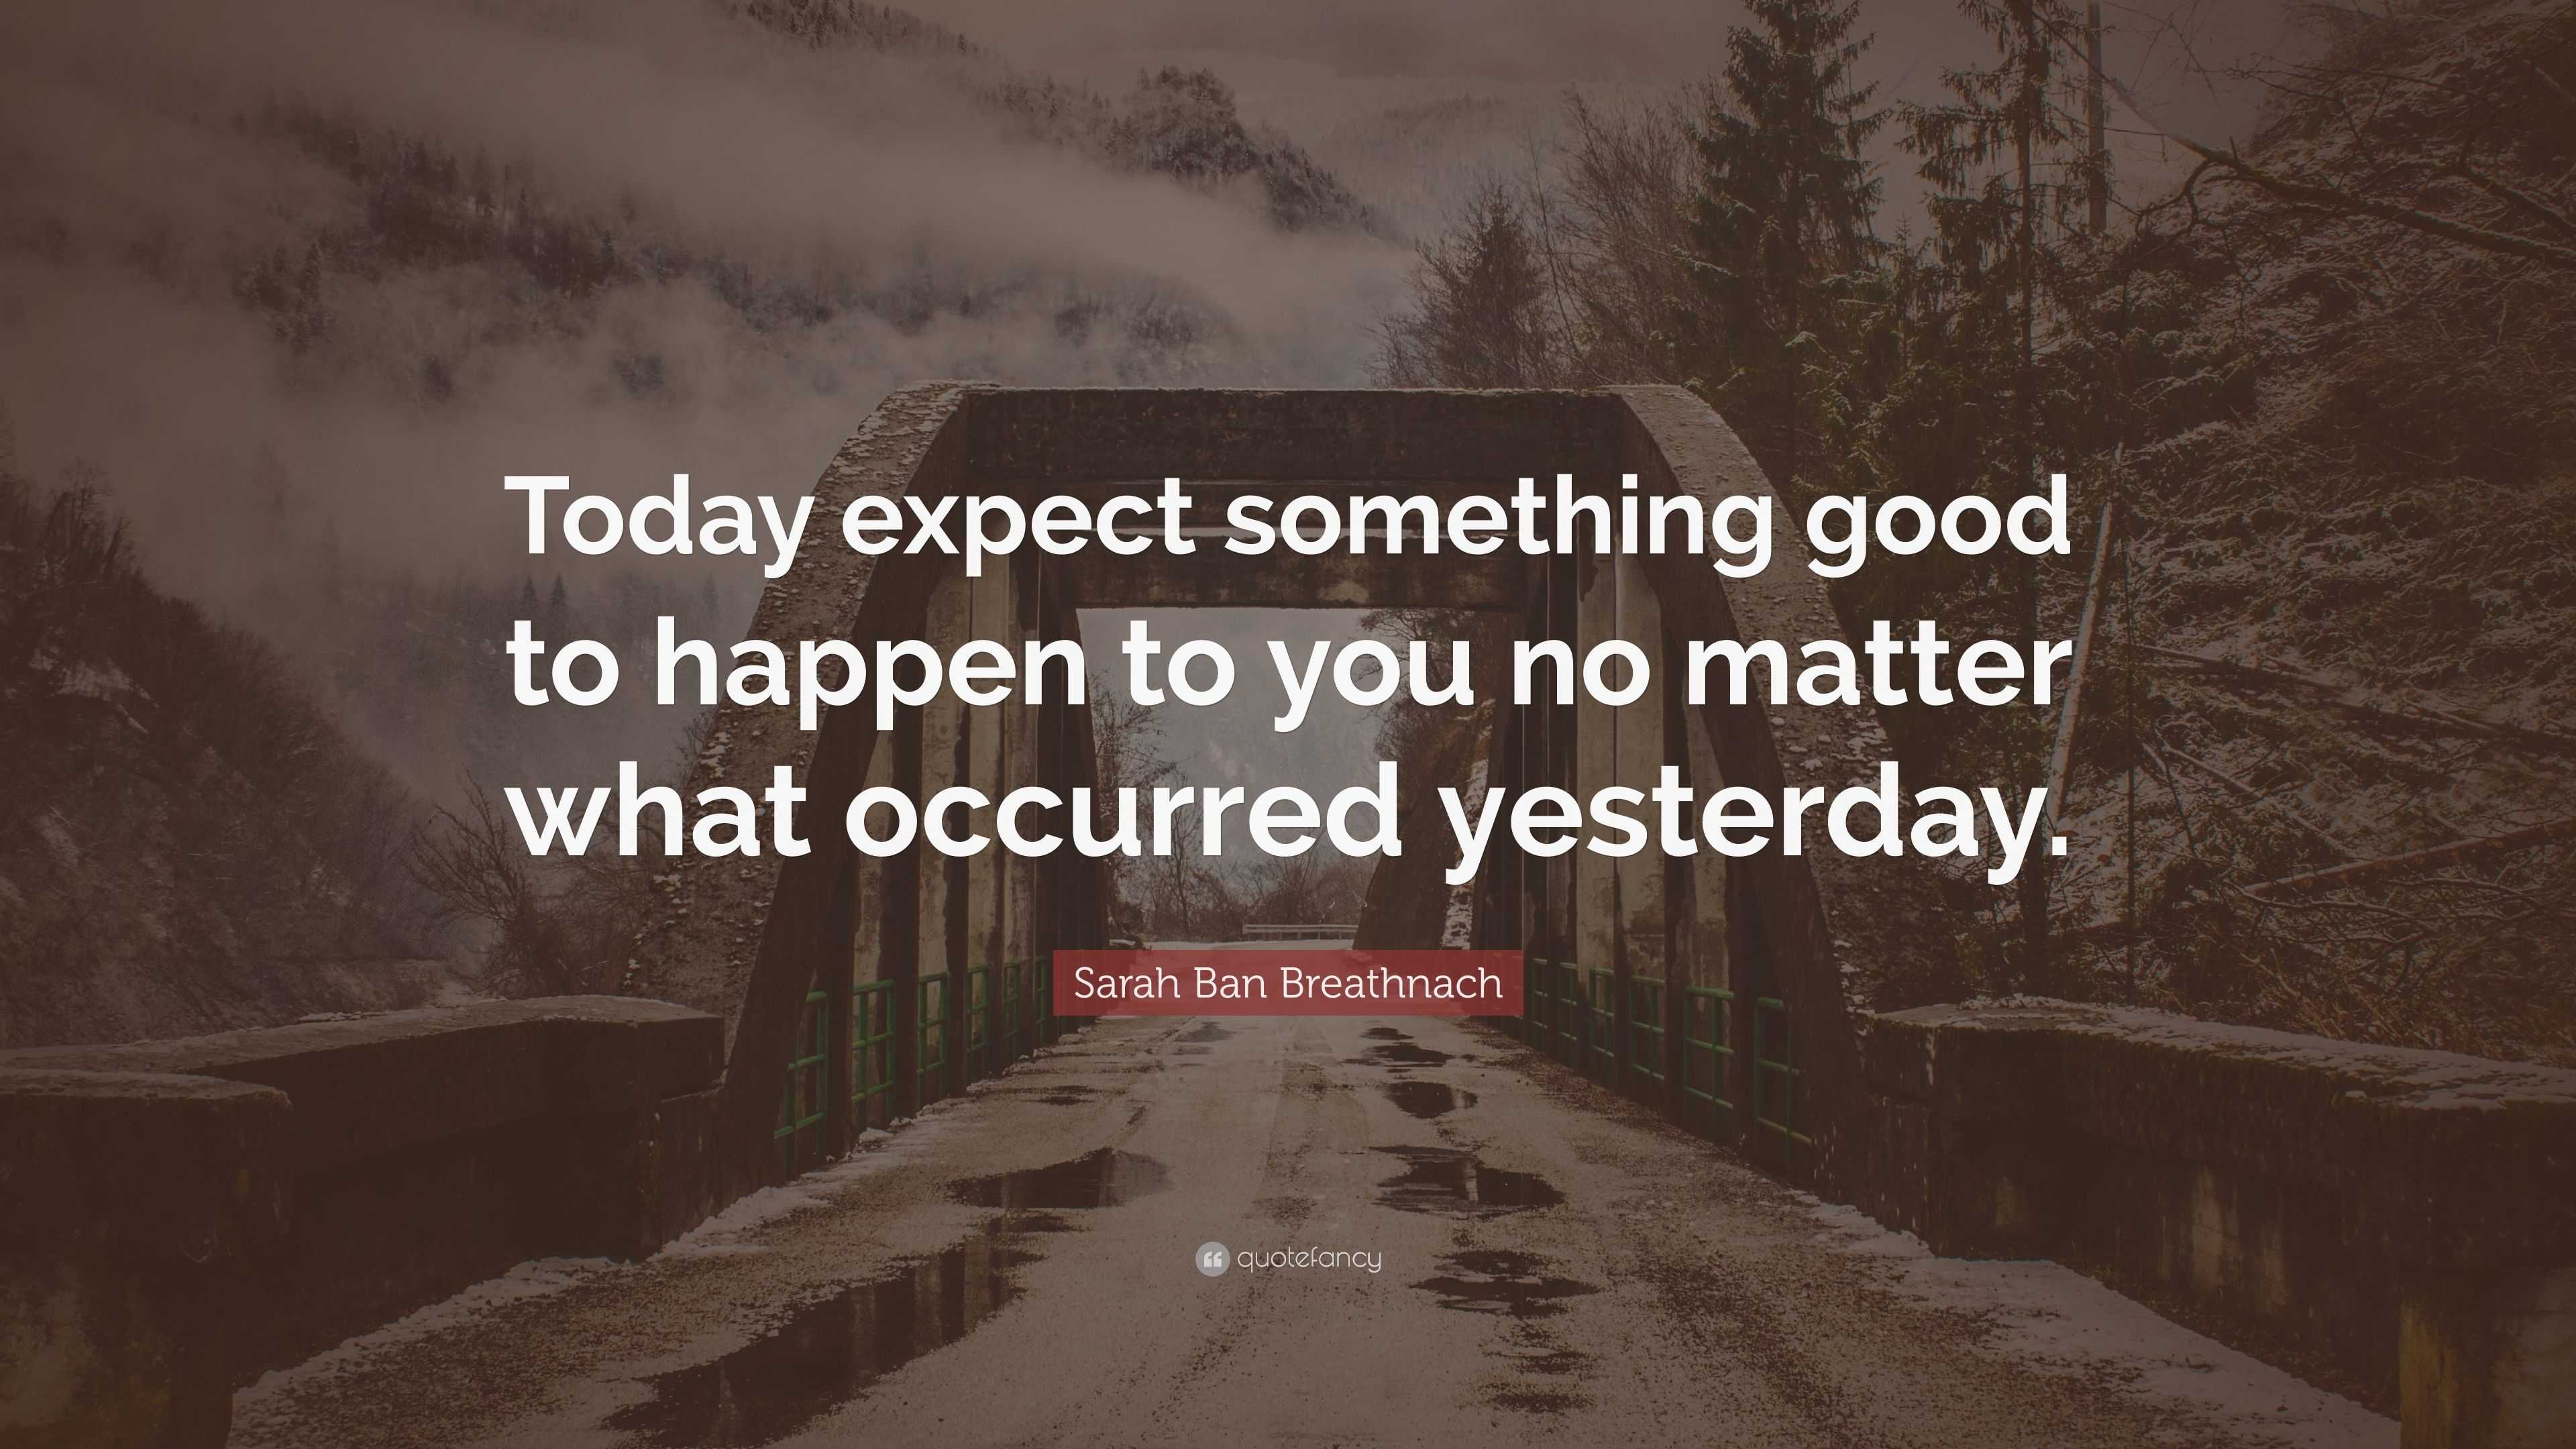 Sarah Ban Breathnach Quote: “Today expect something good to happen to ...